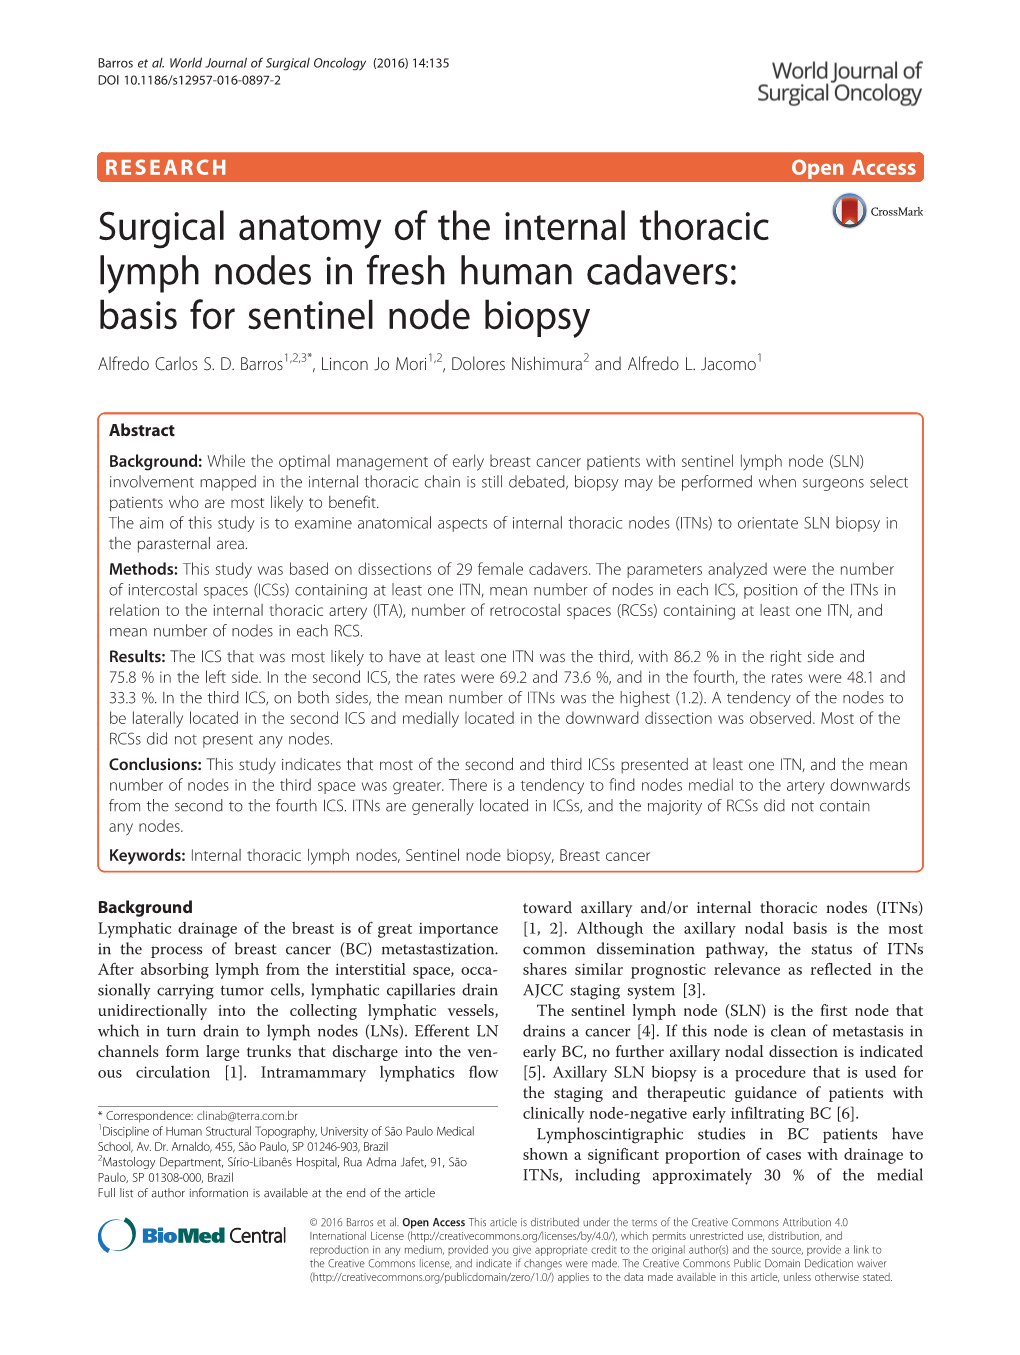 Surgical Anatomy of the Internal Thoracic Lymph Nodes in Fresh Human Cadavers: Basis for Sentinel Node Biopsy Alfredo Carlos S